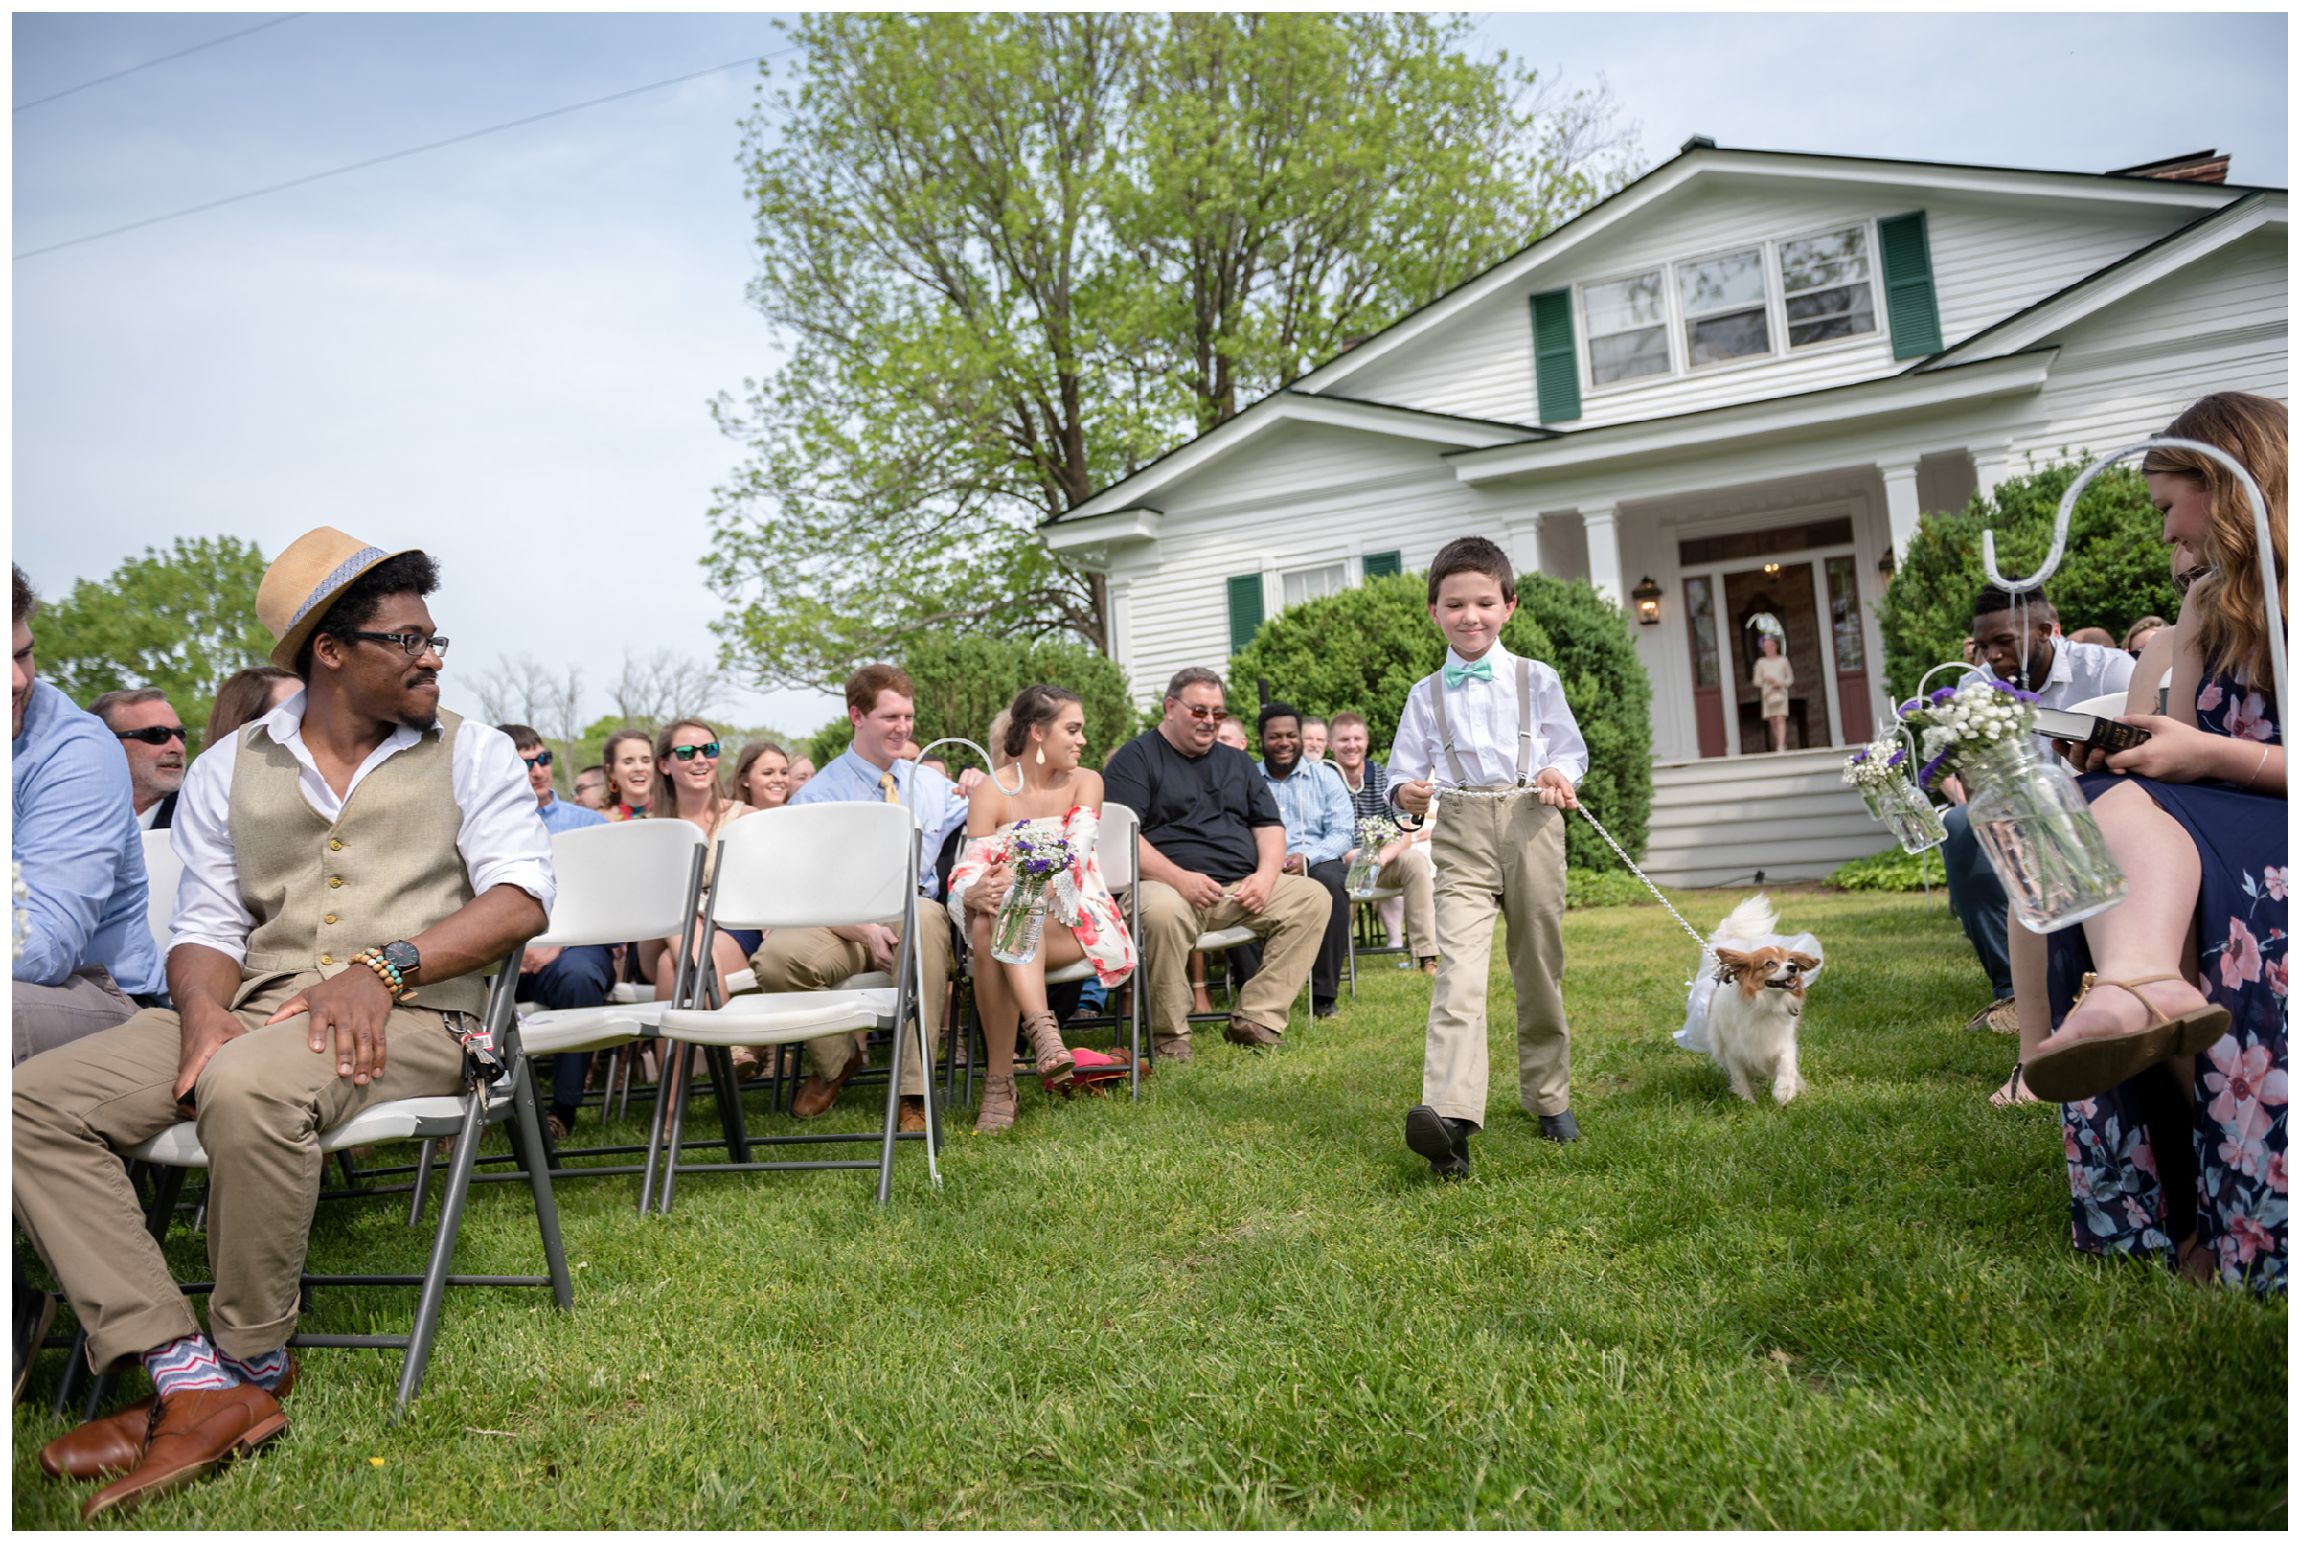 dog acts as ring bearer during wedding ceremony at Wolftrap Farm in Virginia